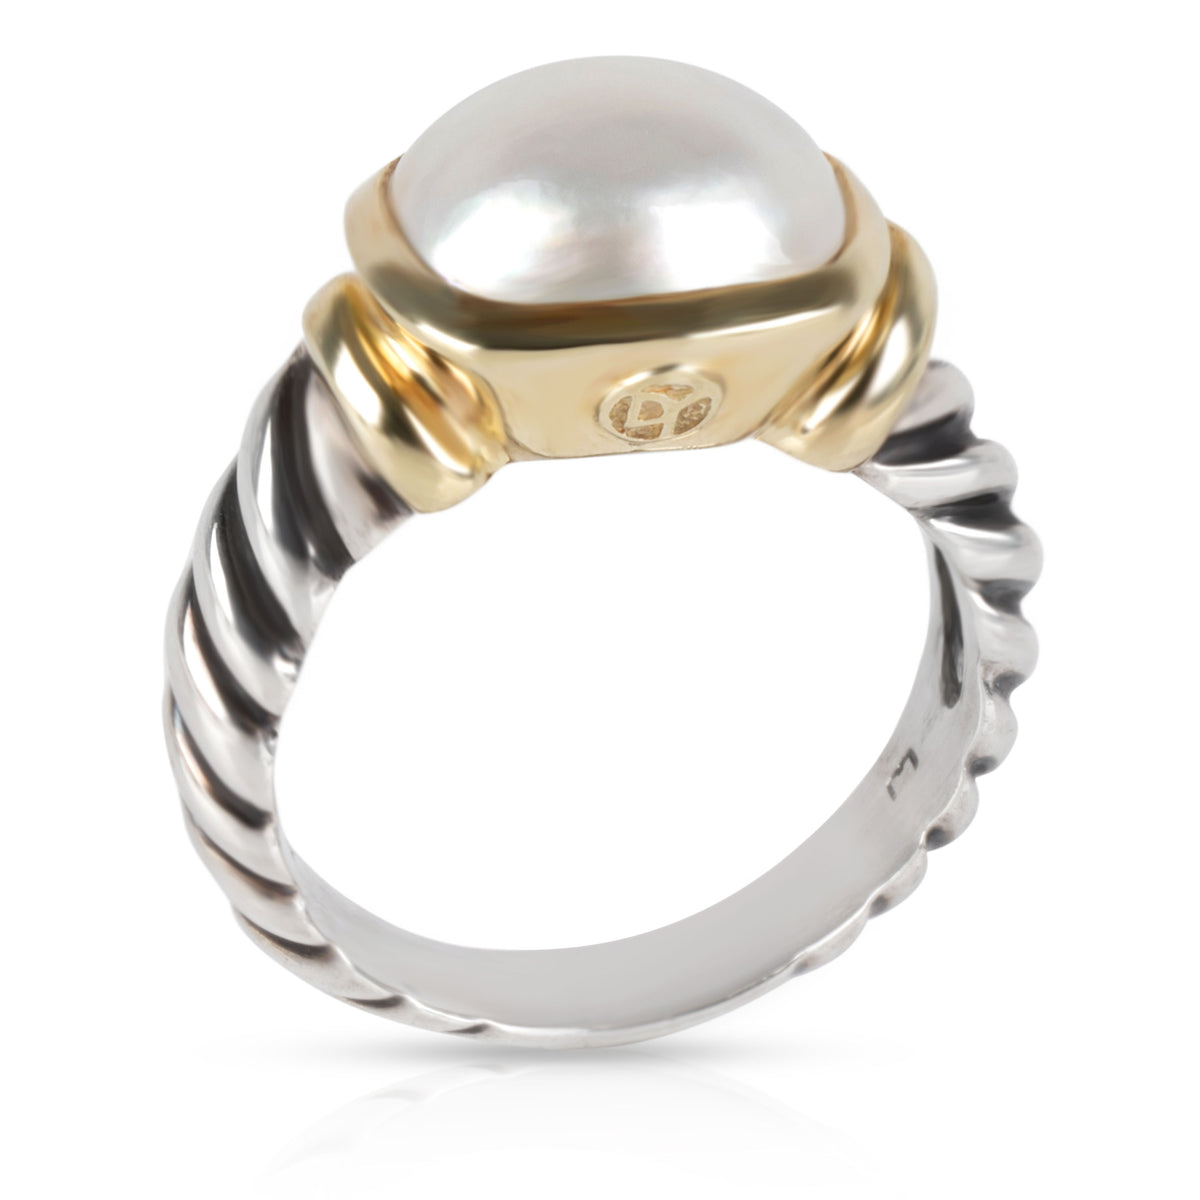 David Yurman Noblesse Pearl Ring in 14K Yellow Gold/Sterling Silver